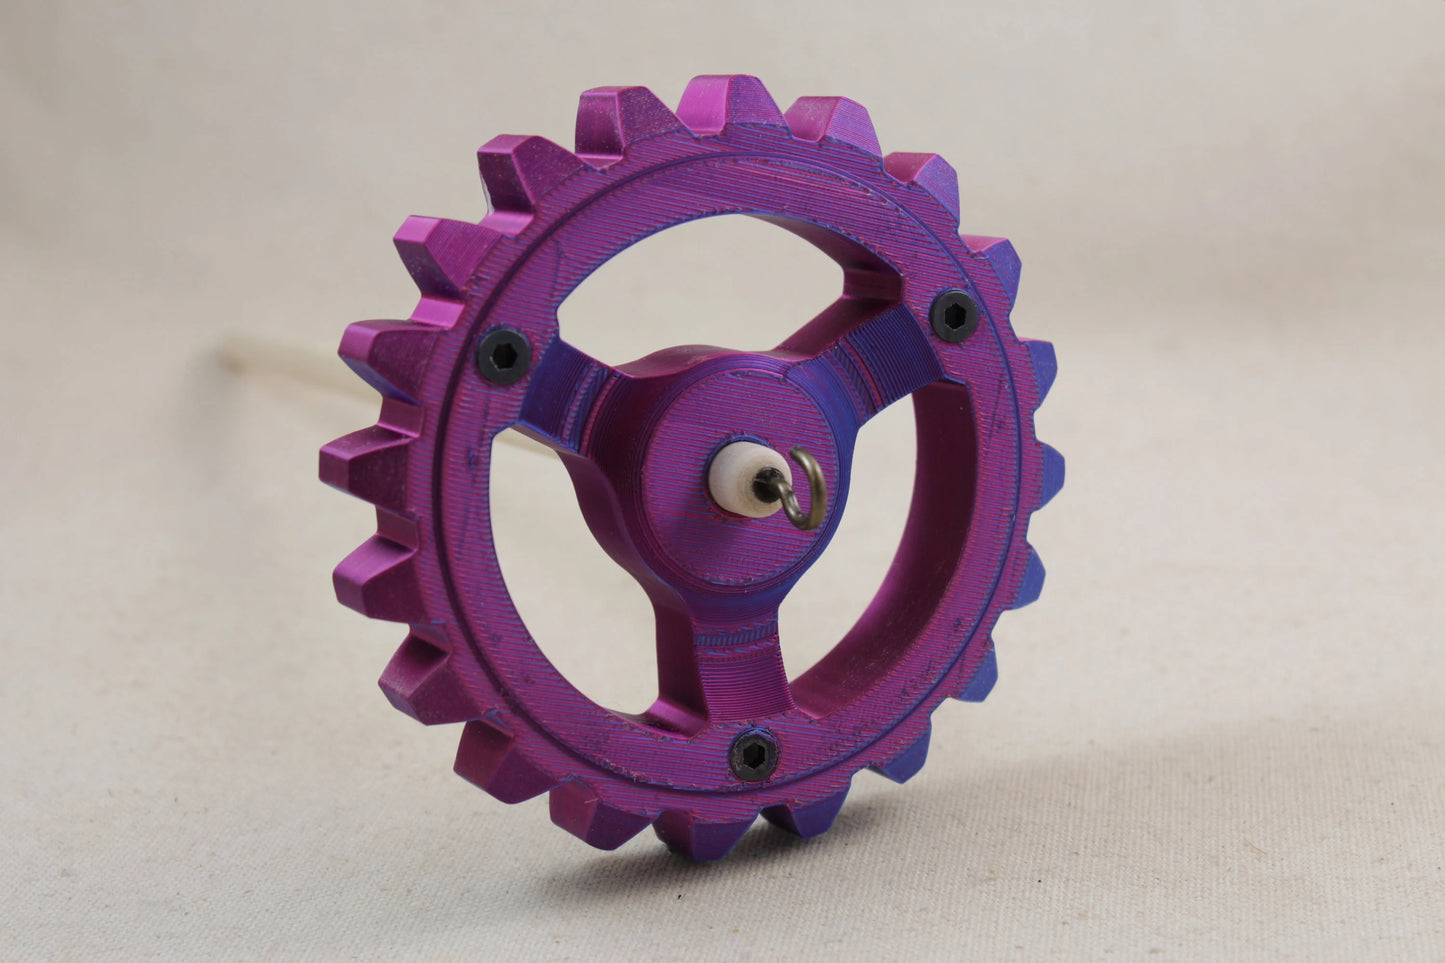 3D Printed Gear Spindle